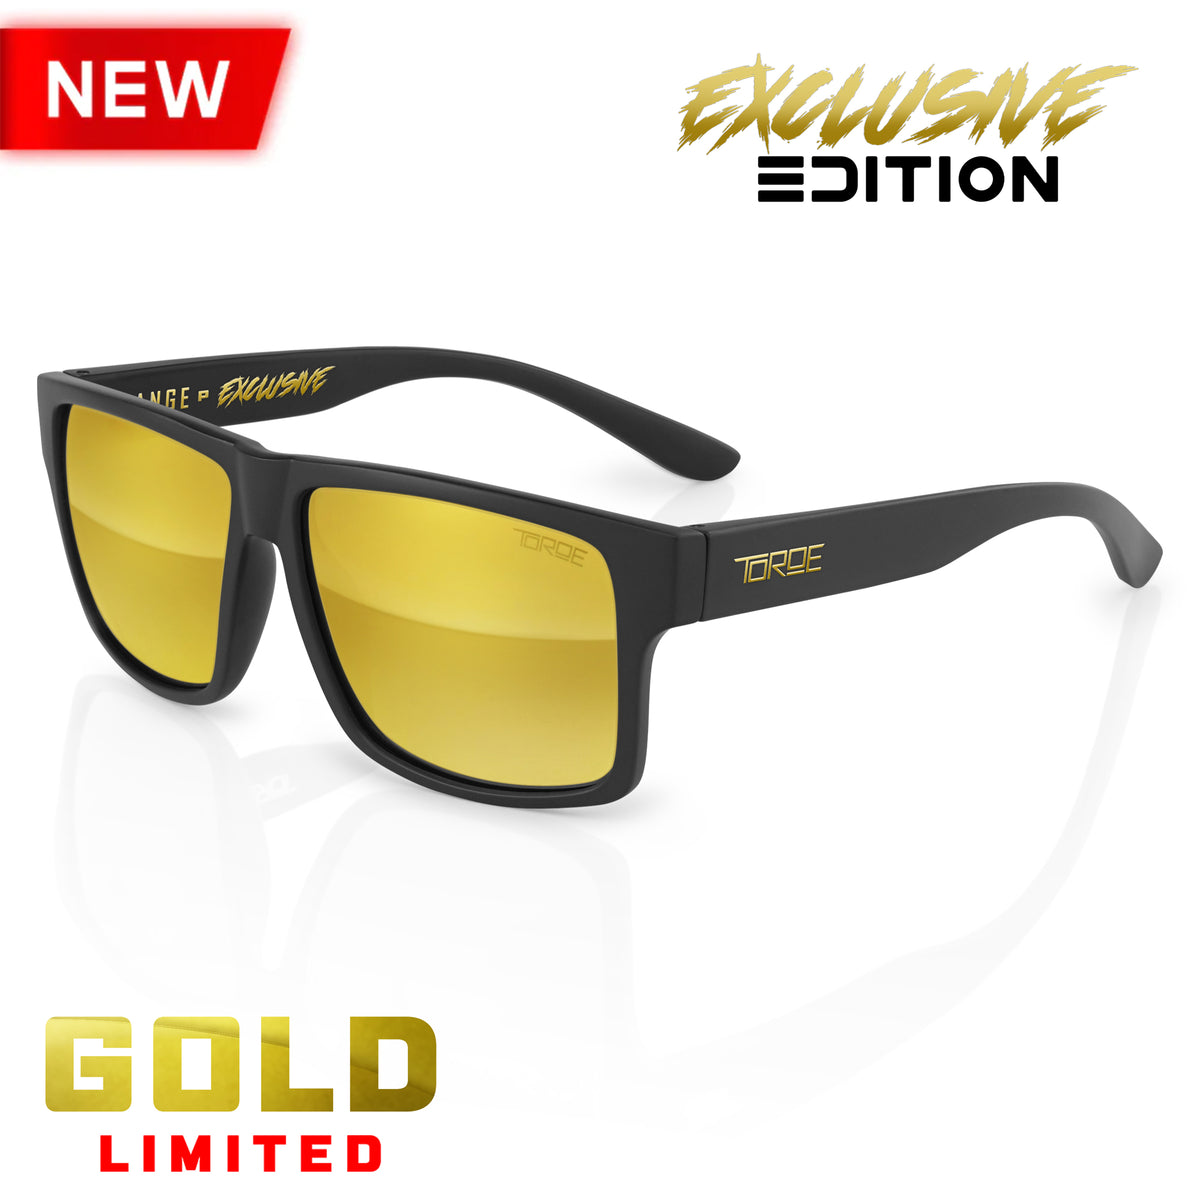 GOLD) Exclusive Edition RANGE Polarized Sunglasses with Lifetime